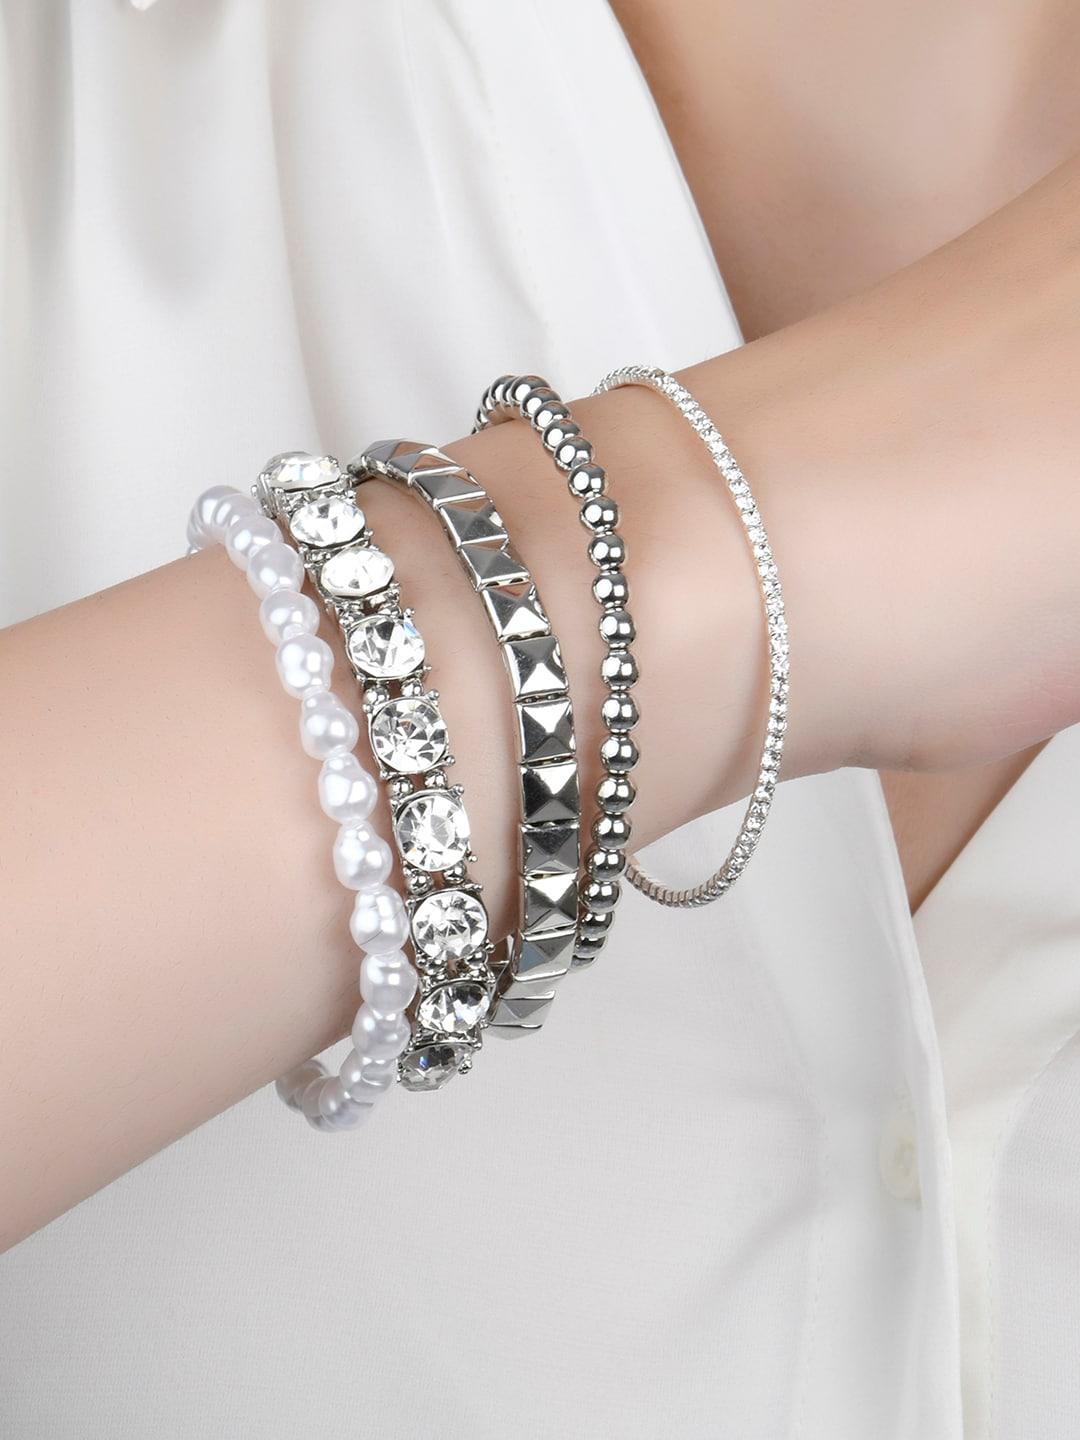 Lilly & sparkle Women Set Of 5 Silver-Toned & White Crystals Silver-Plated Link Bracelet